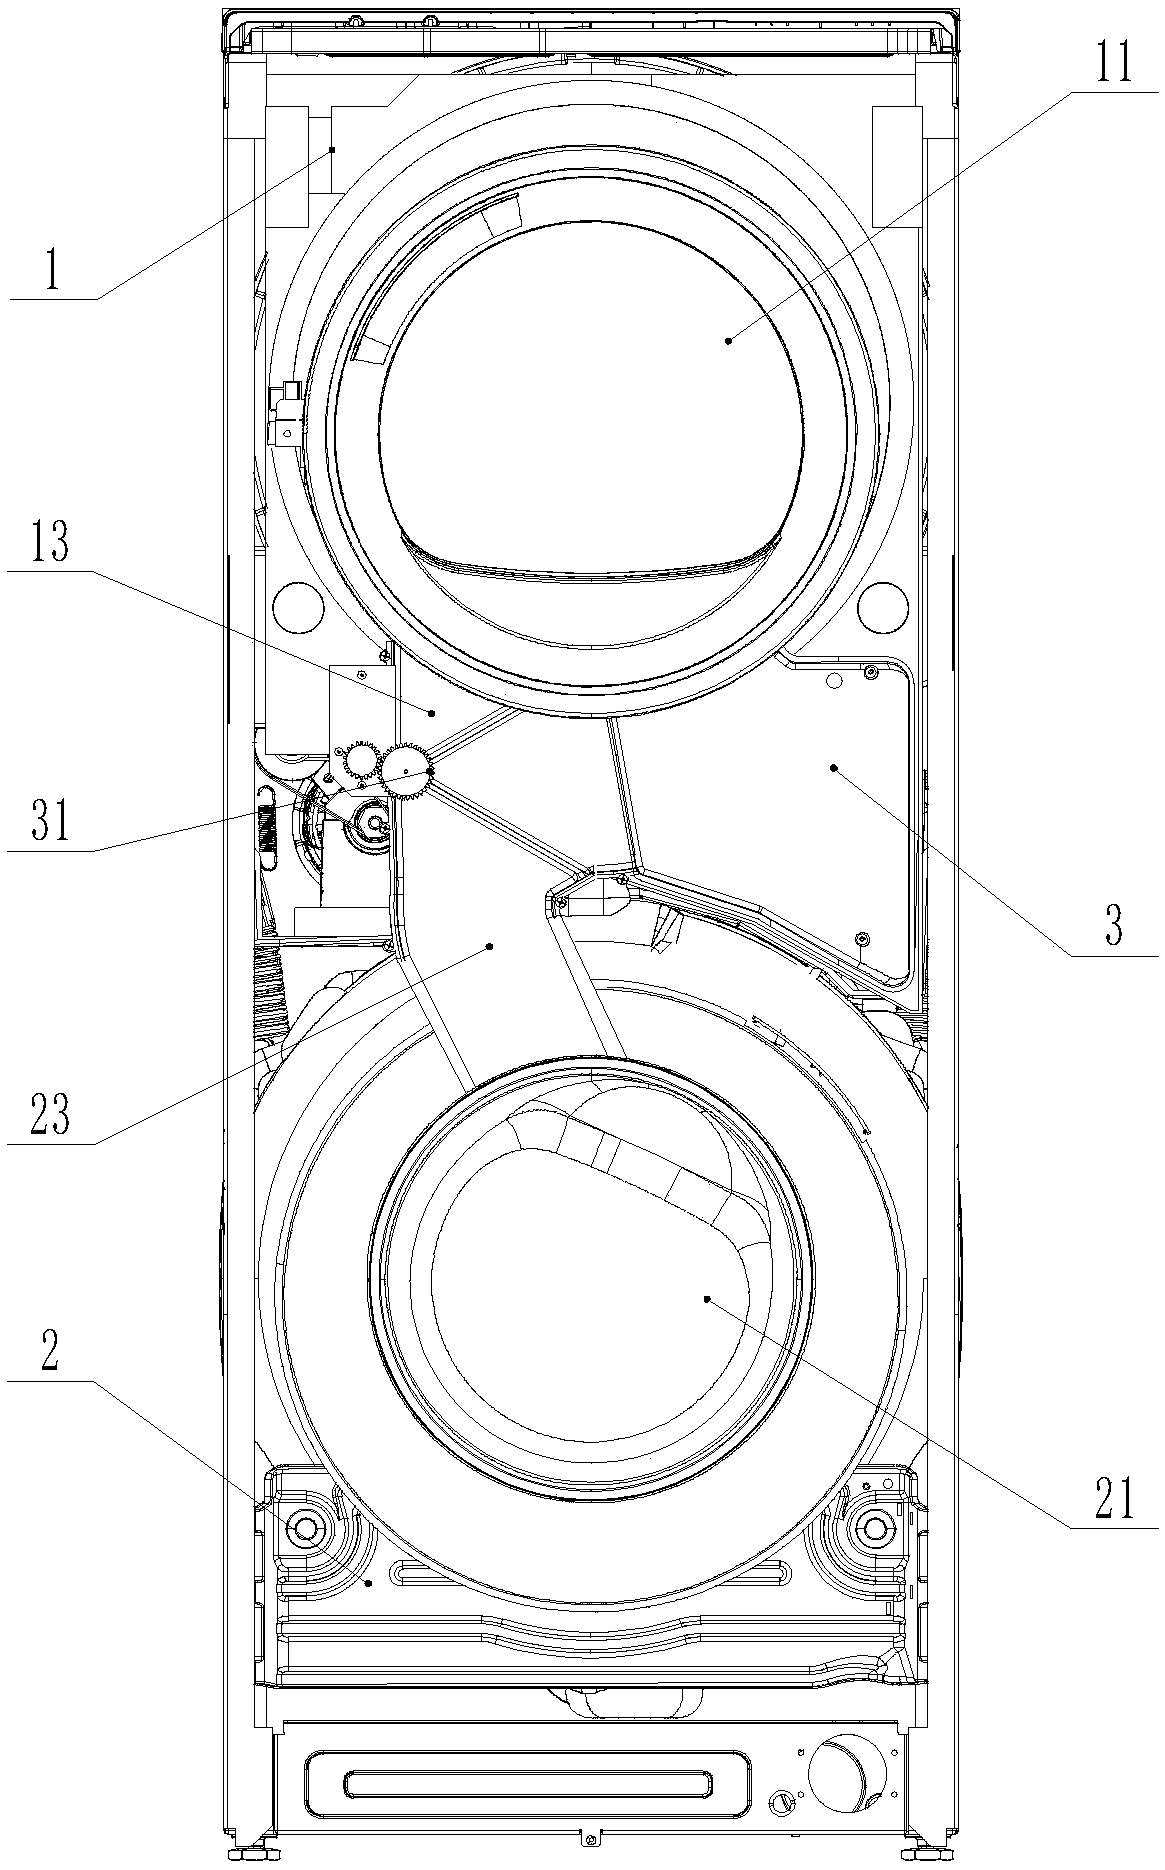 Clothes processing device